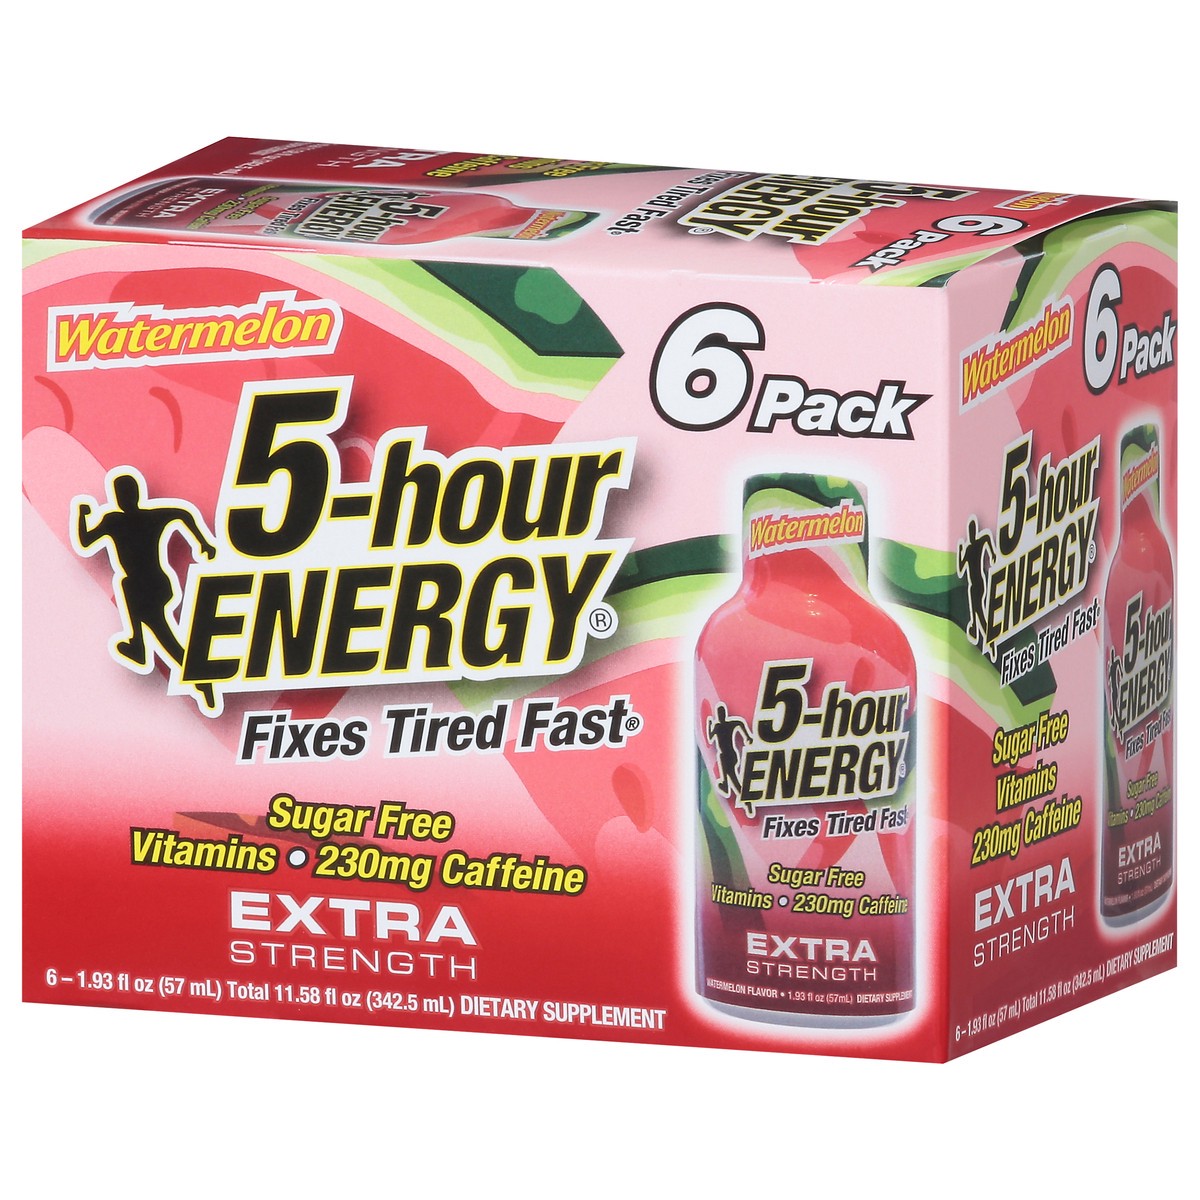 slide 2 of 15, 5-hour ENERGY 5-Hour Watermelon Extra Strength 6-pack, 6 ct